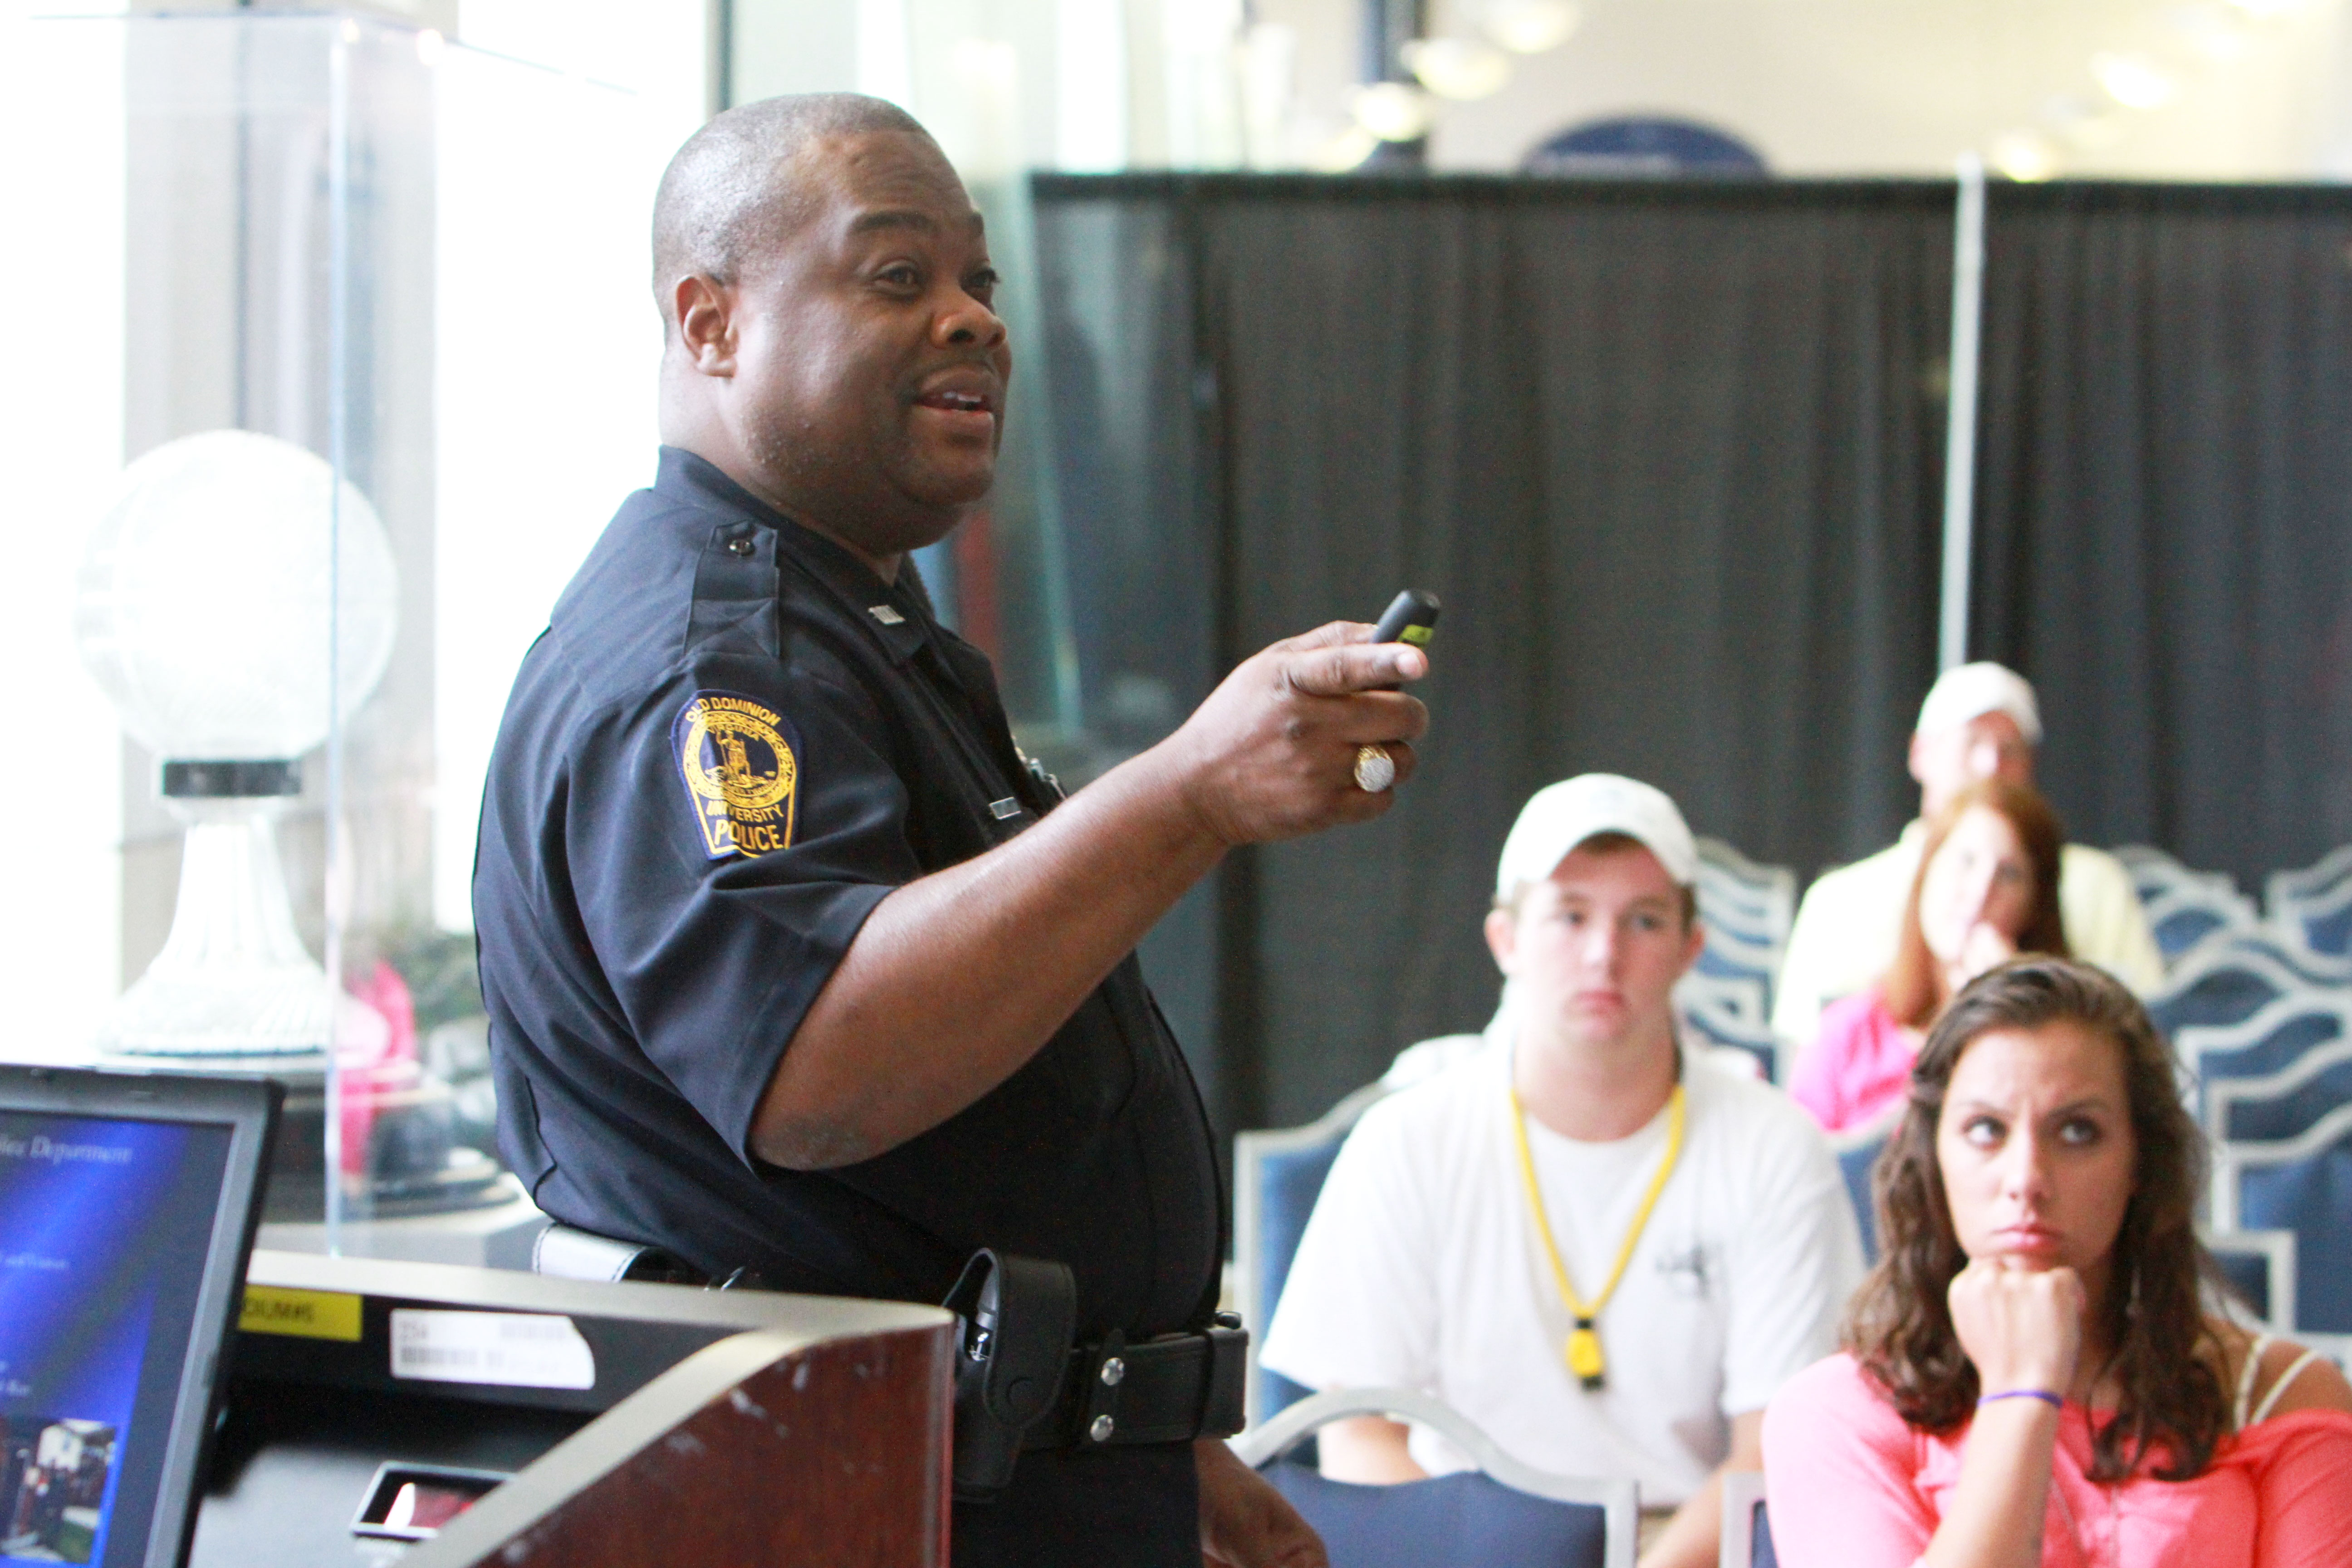 Officer presents wellness and safety at New Student Orientation.